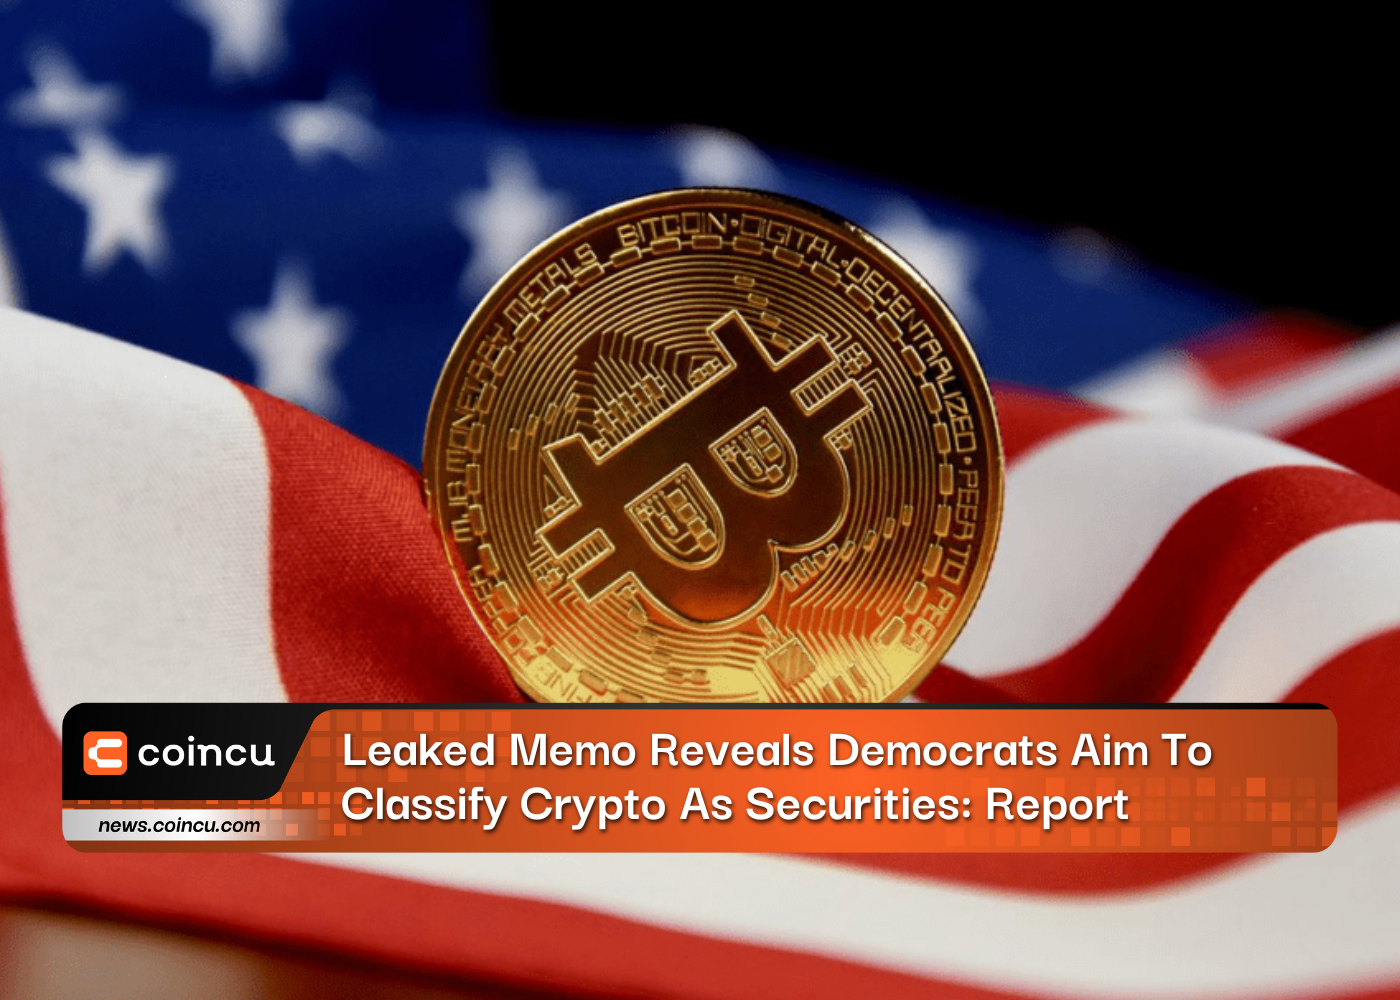 Leaked Memo Reveals Democrats Aim To Classify Crypto As Securities: Report